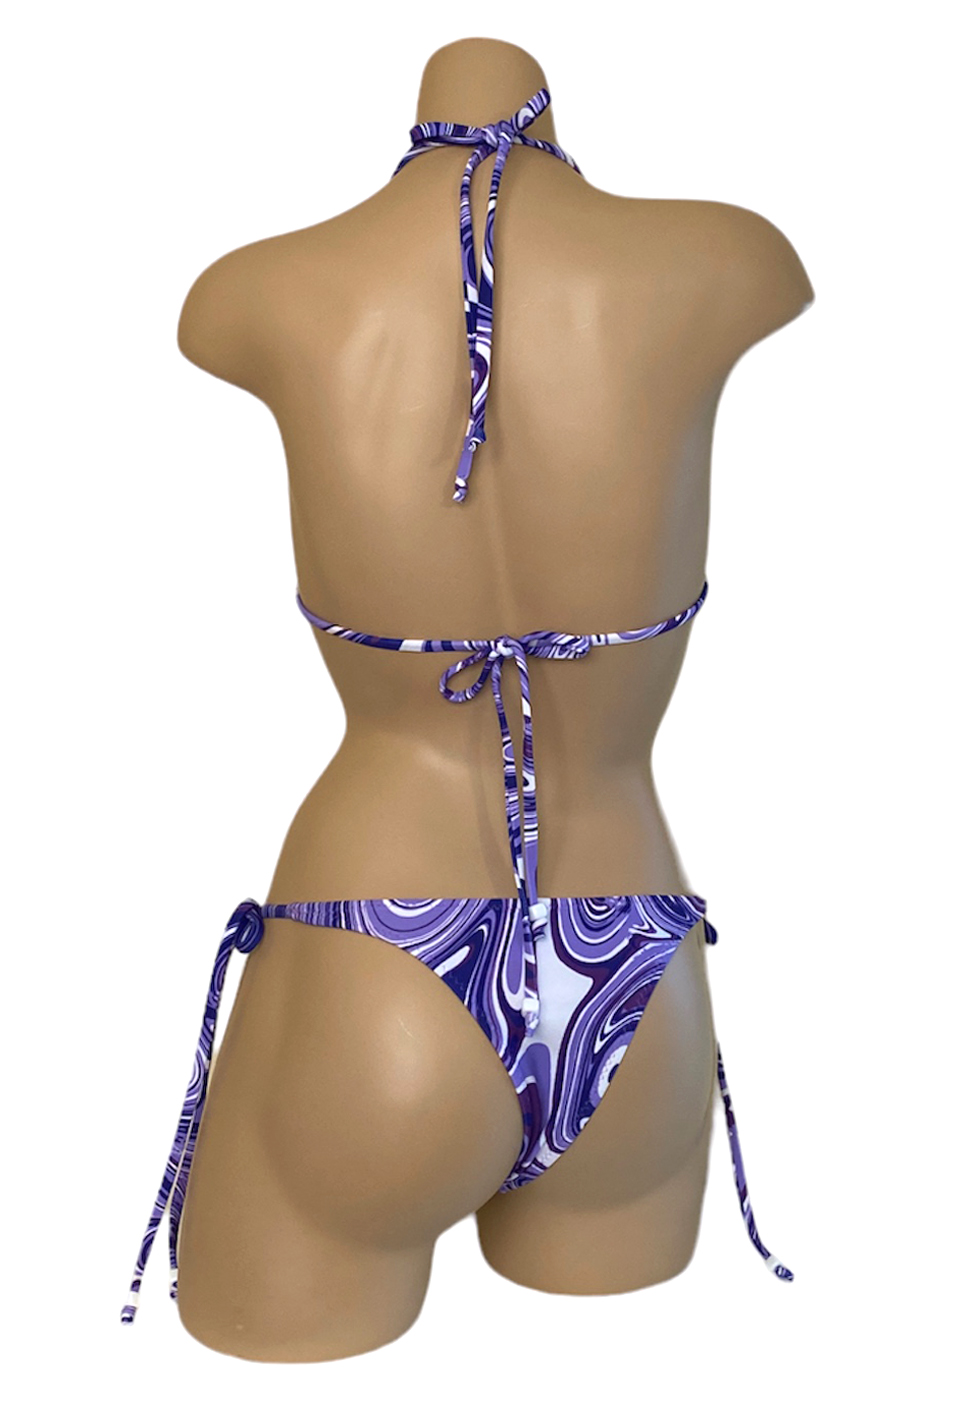 Low waist tie side cheeky bikini bottoms with beaded cord ends and triangle bikini top with beads at center in purple swirl fabric back view